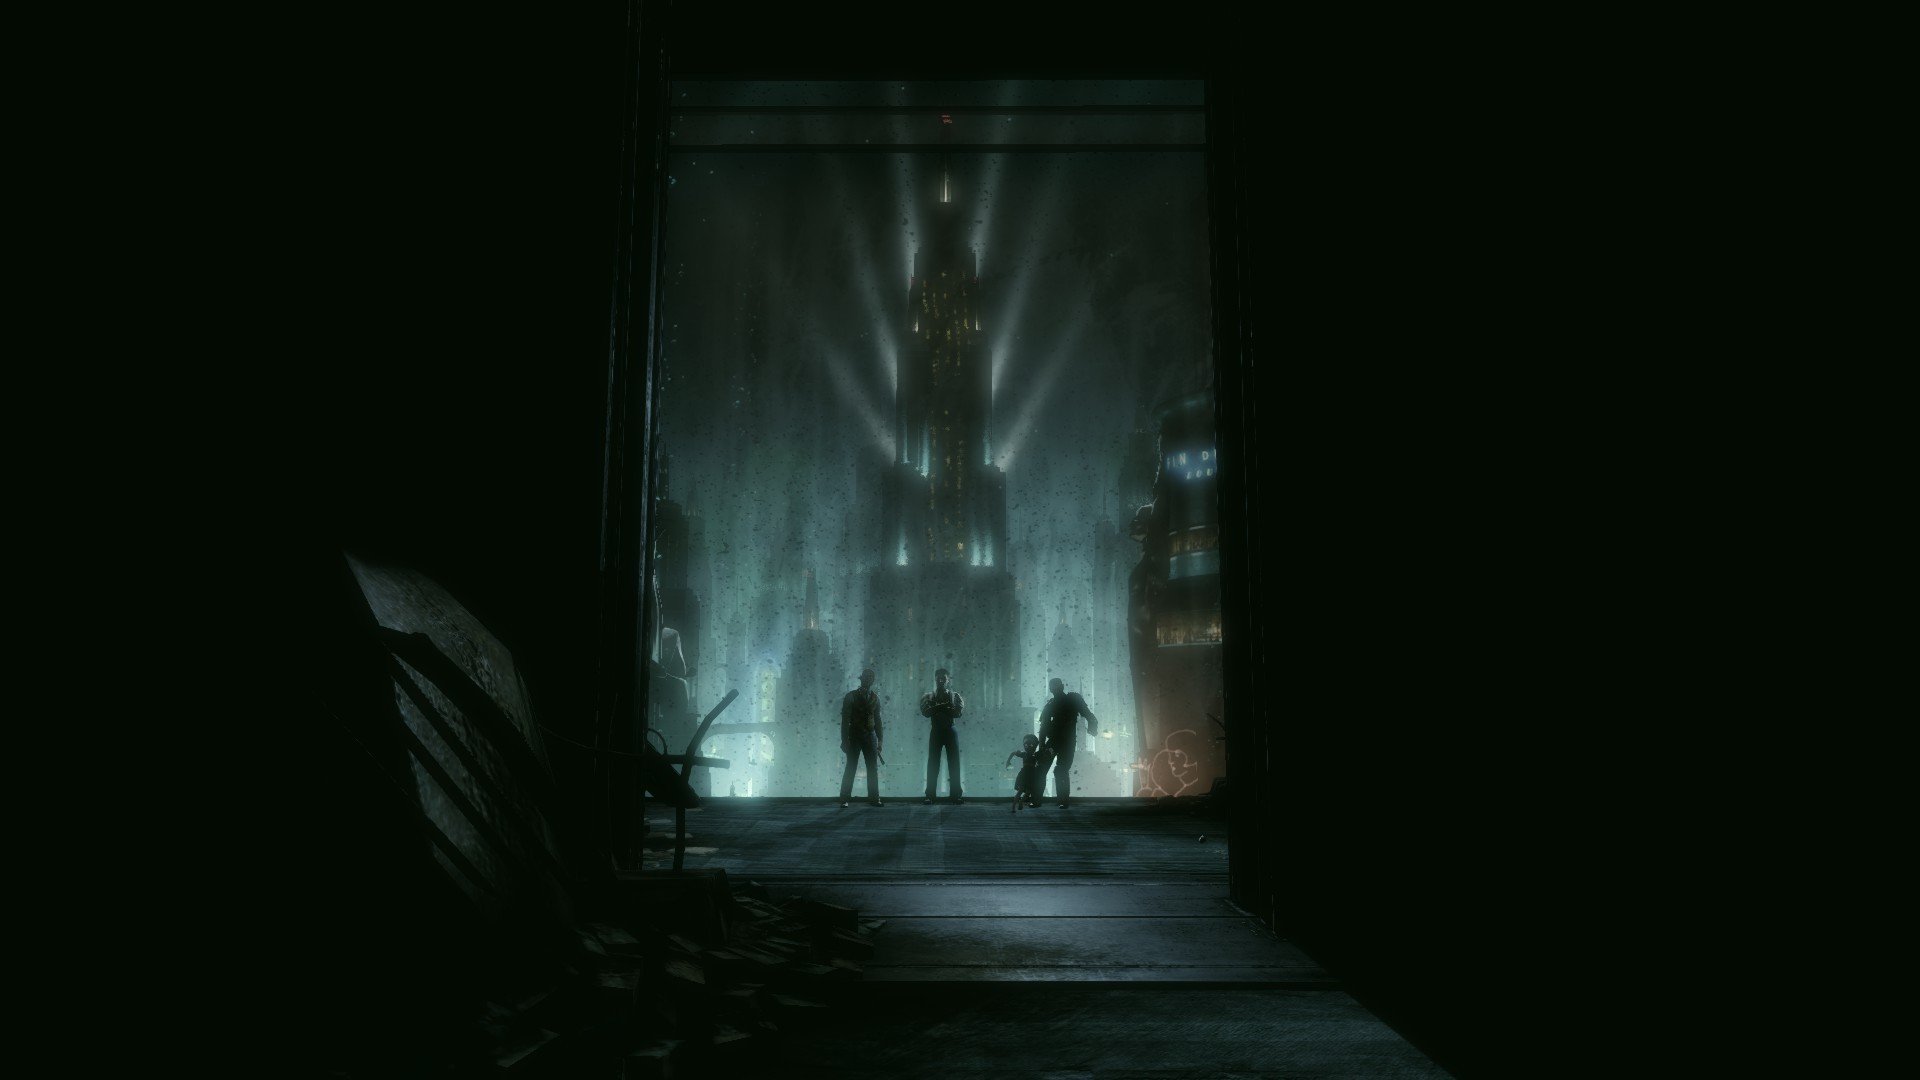 free download the rapture video game